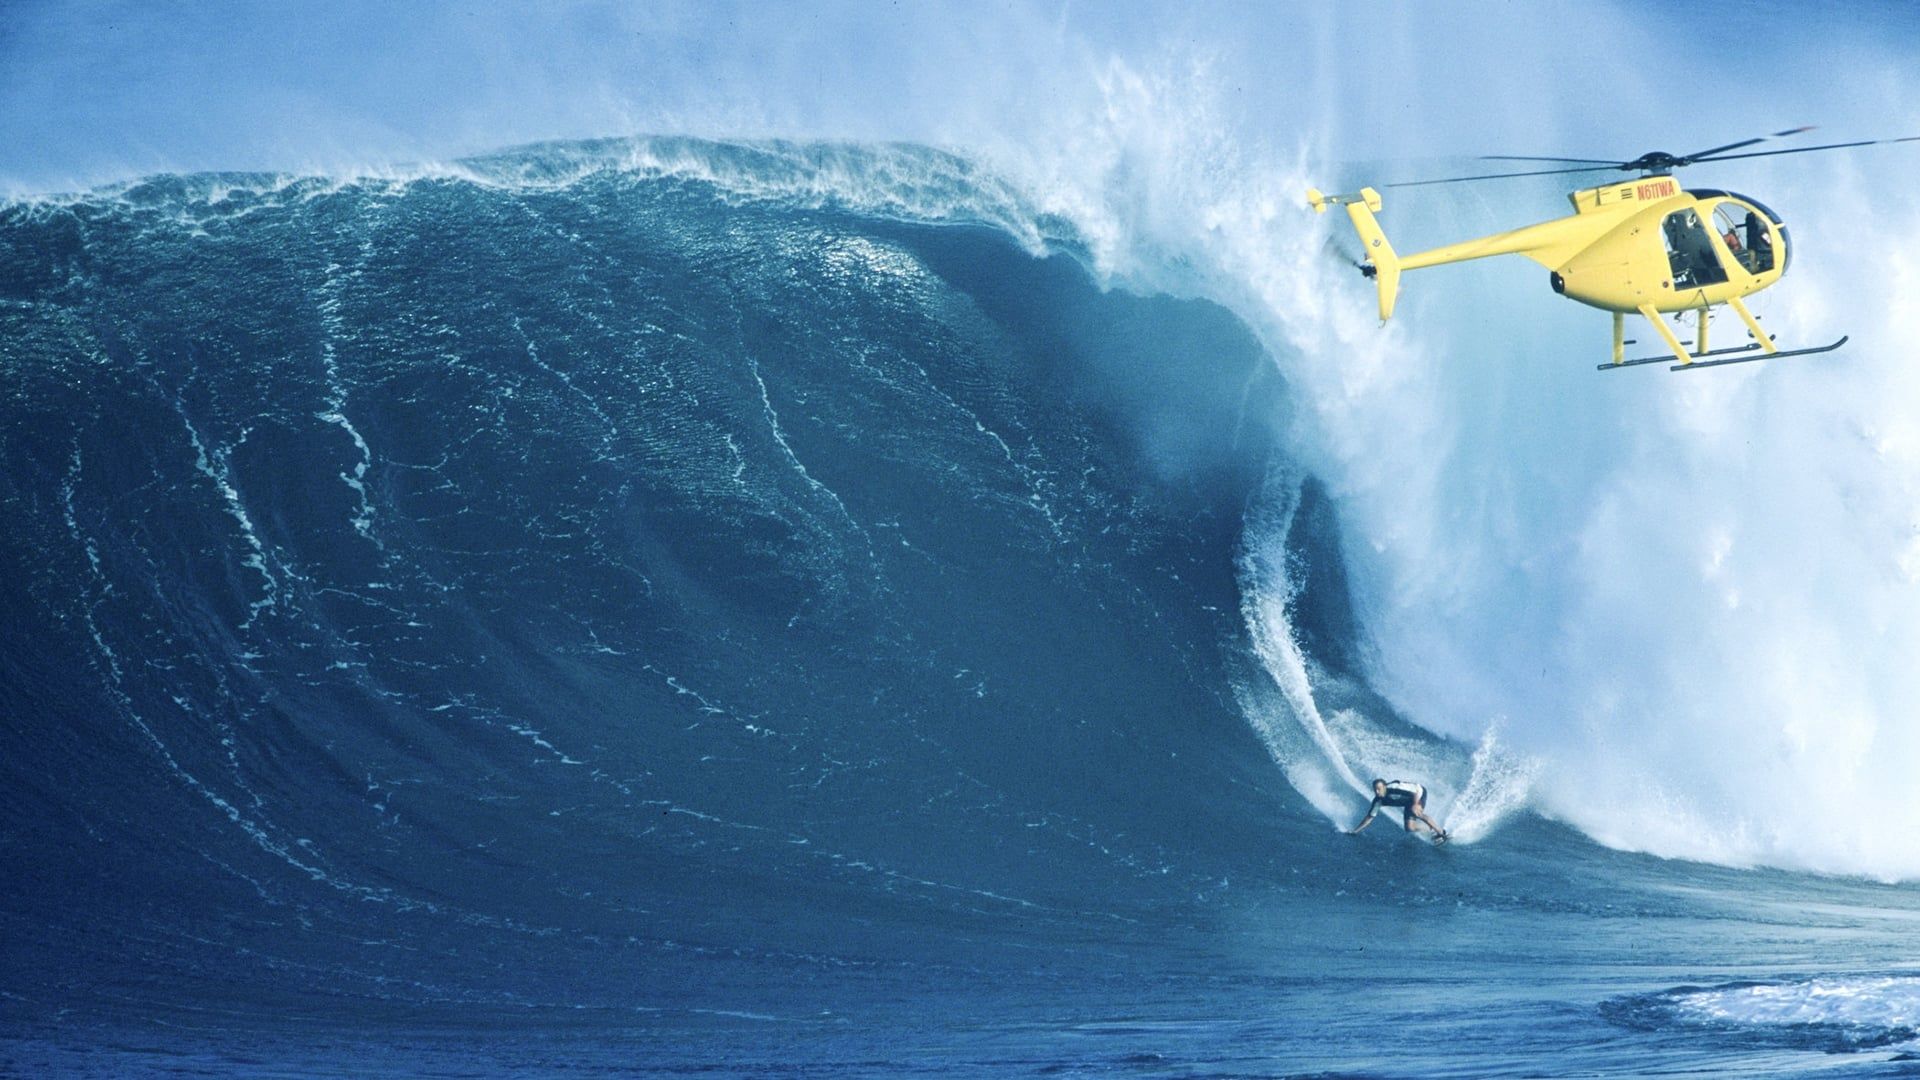 Take Every Wave: The Life of Laird Hamilton background